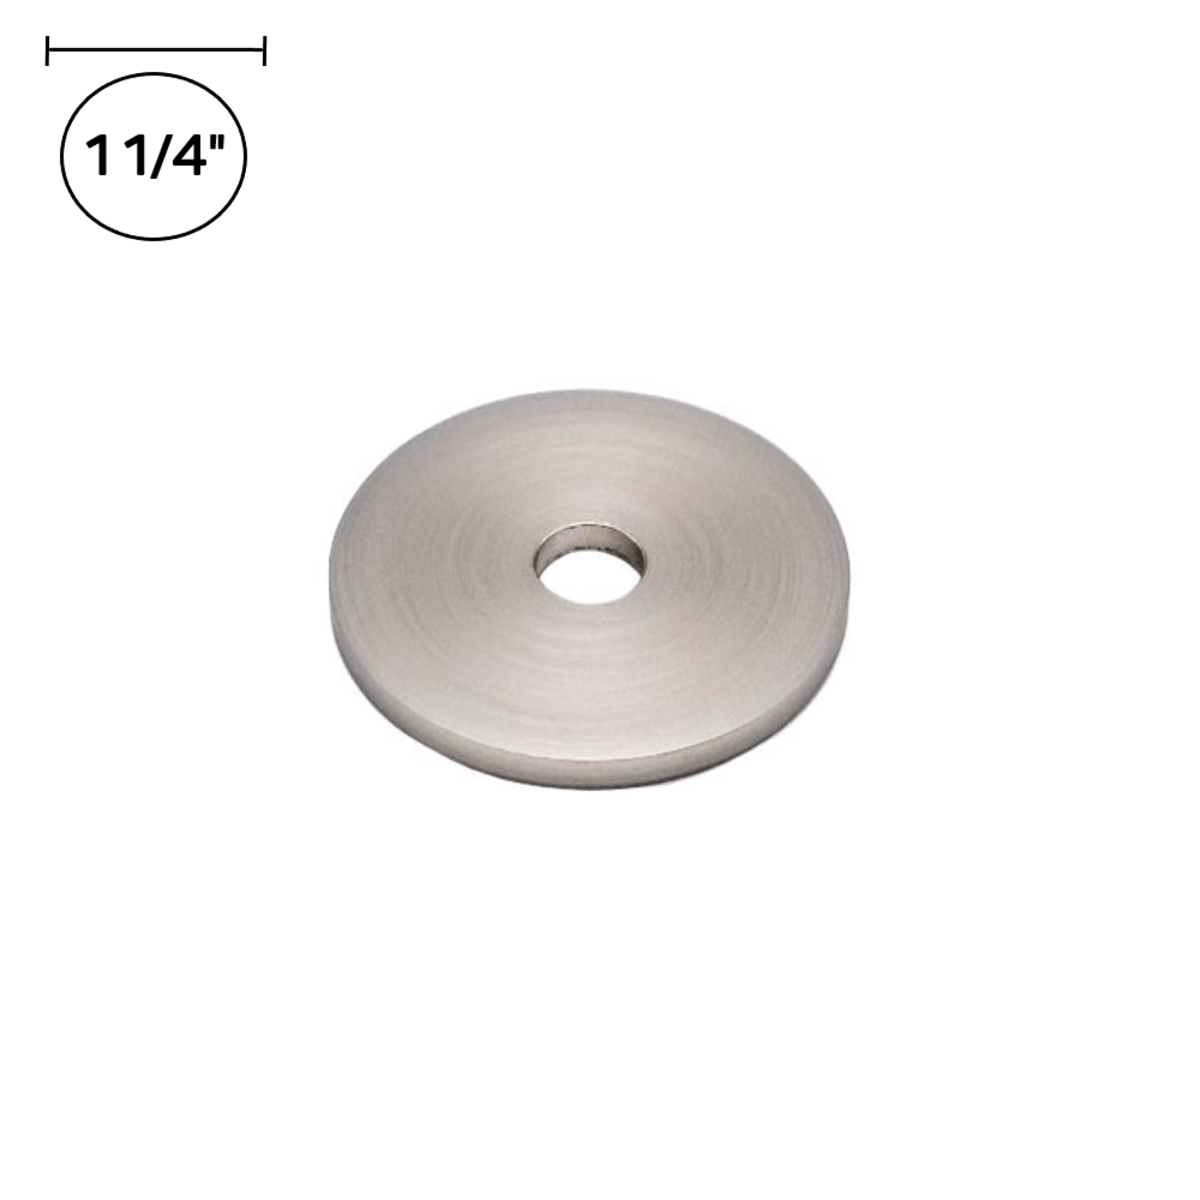 ROT-001 Over sized Washers